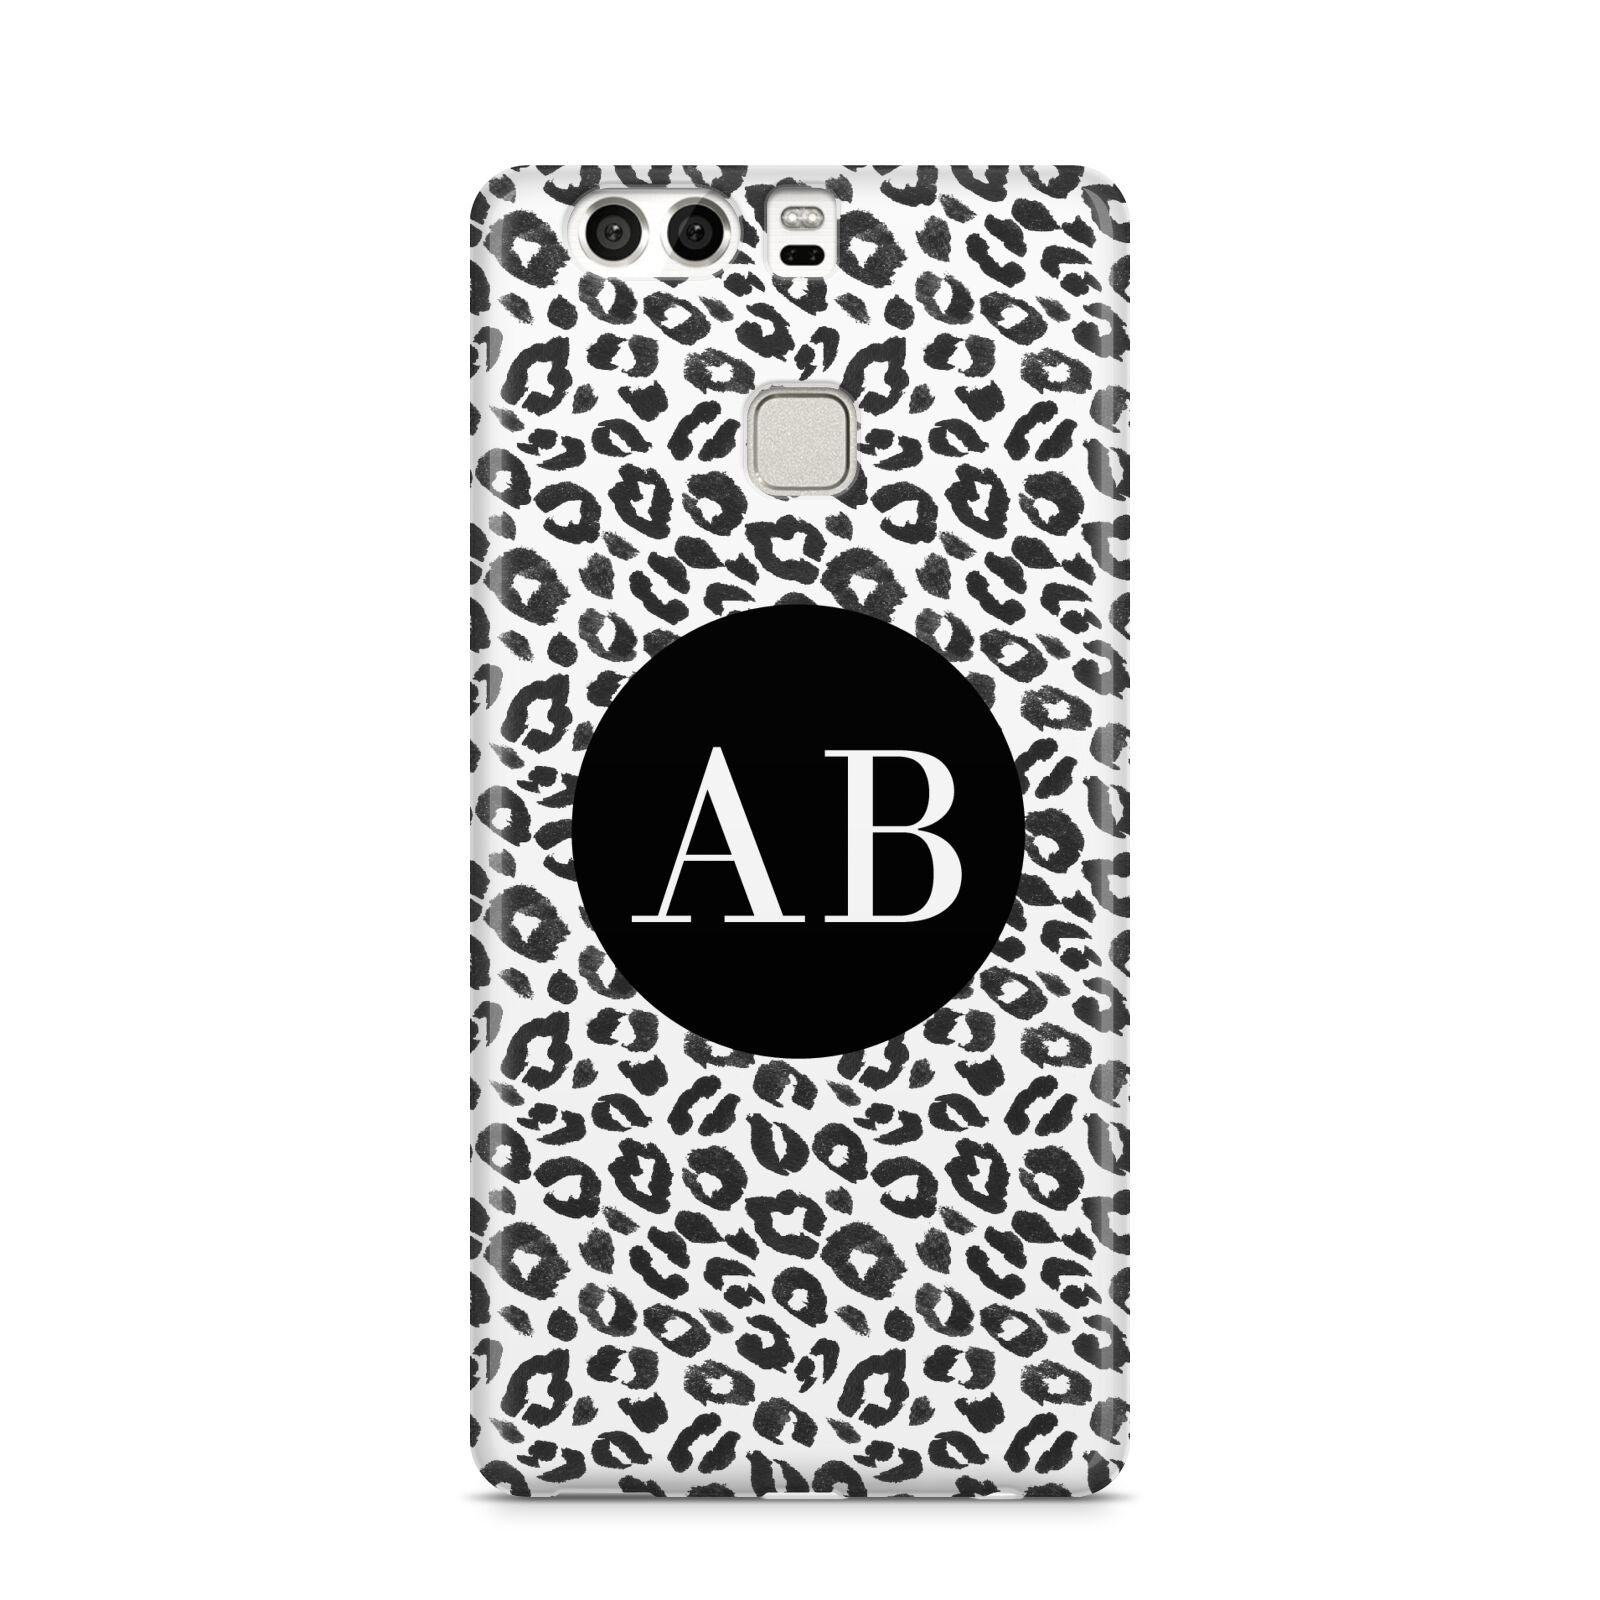 Leopard Print Black and White Huawei P9 Case